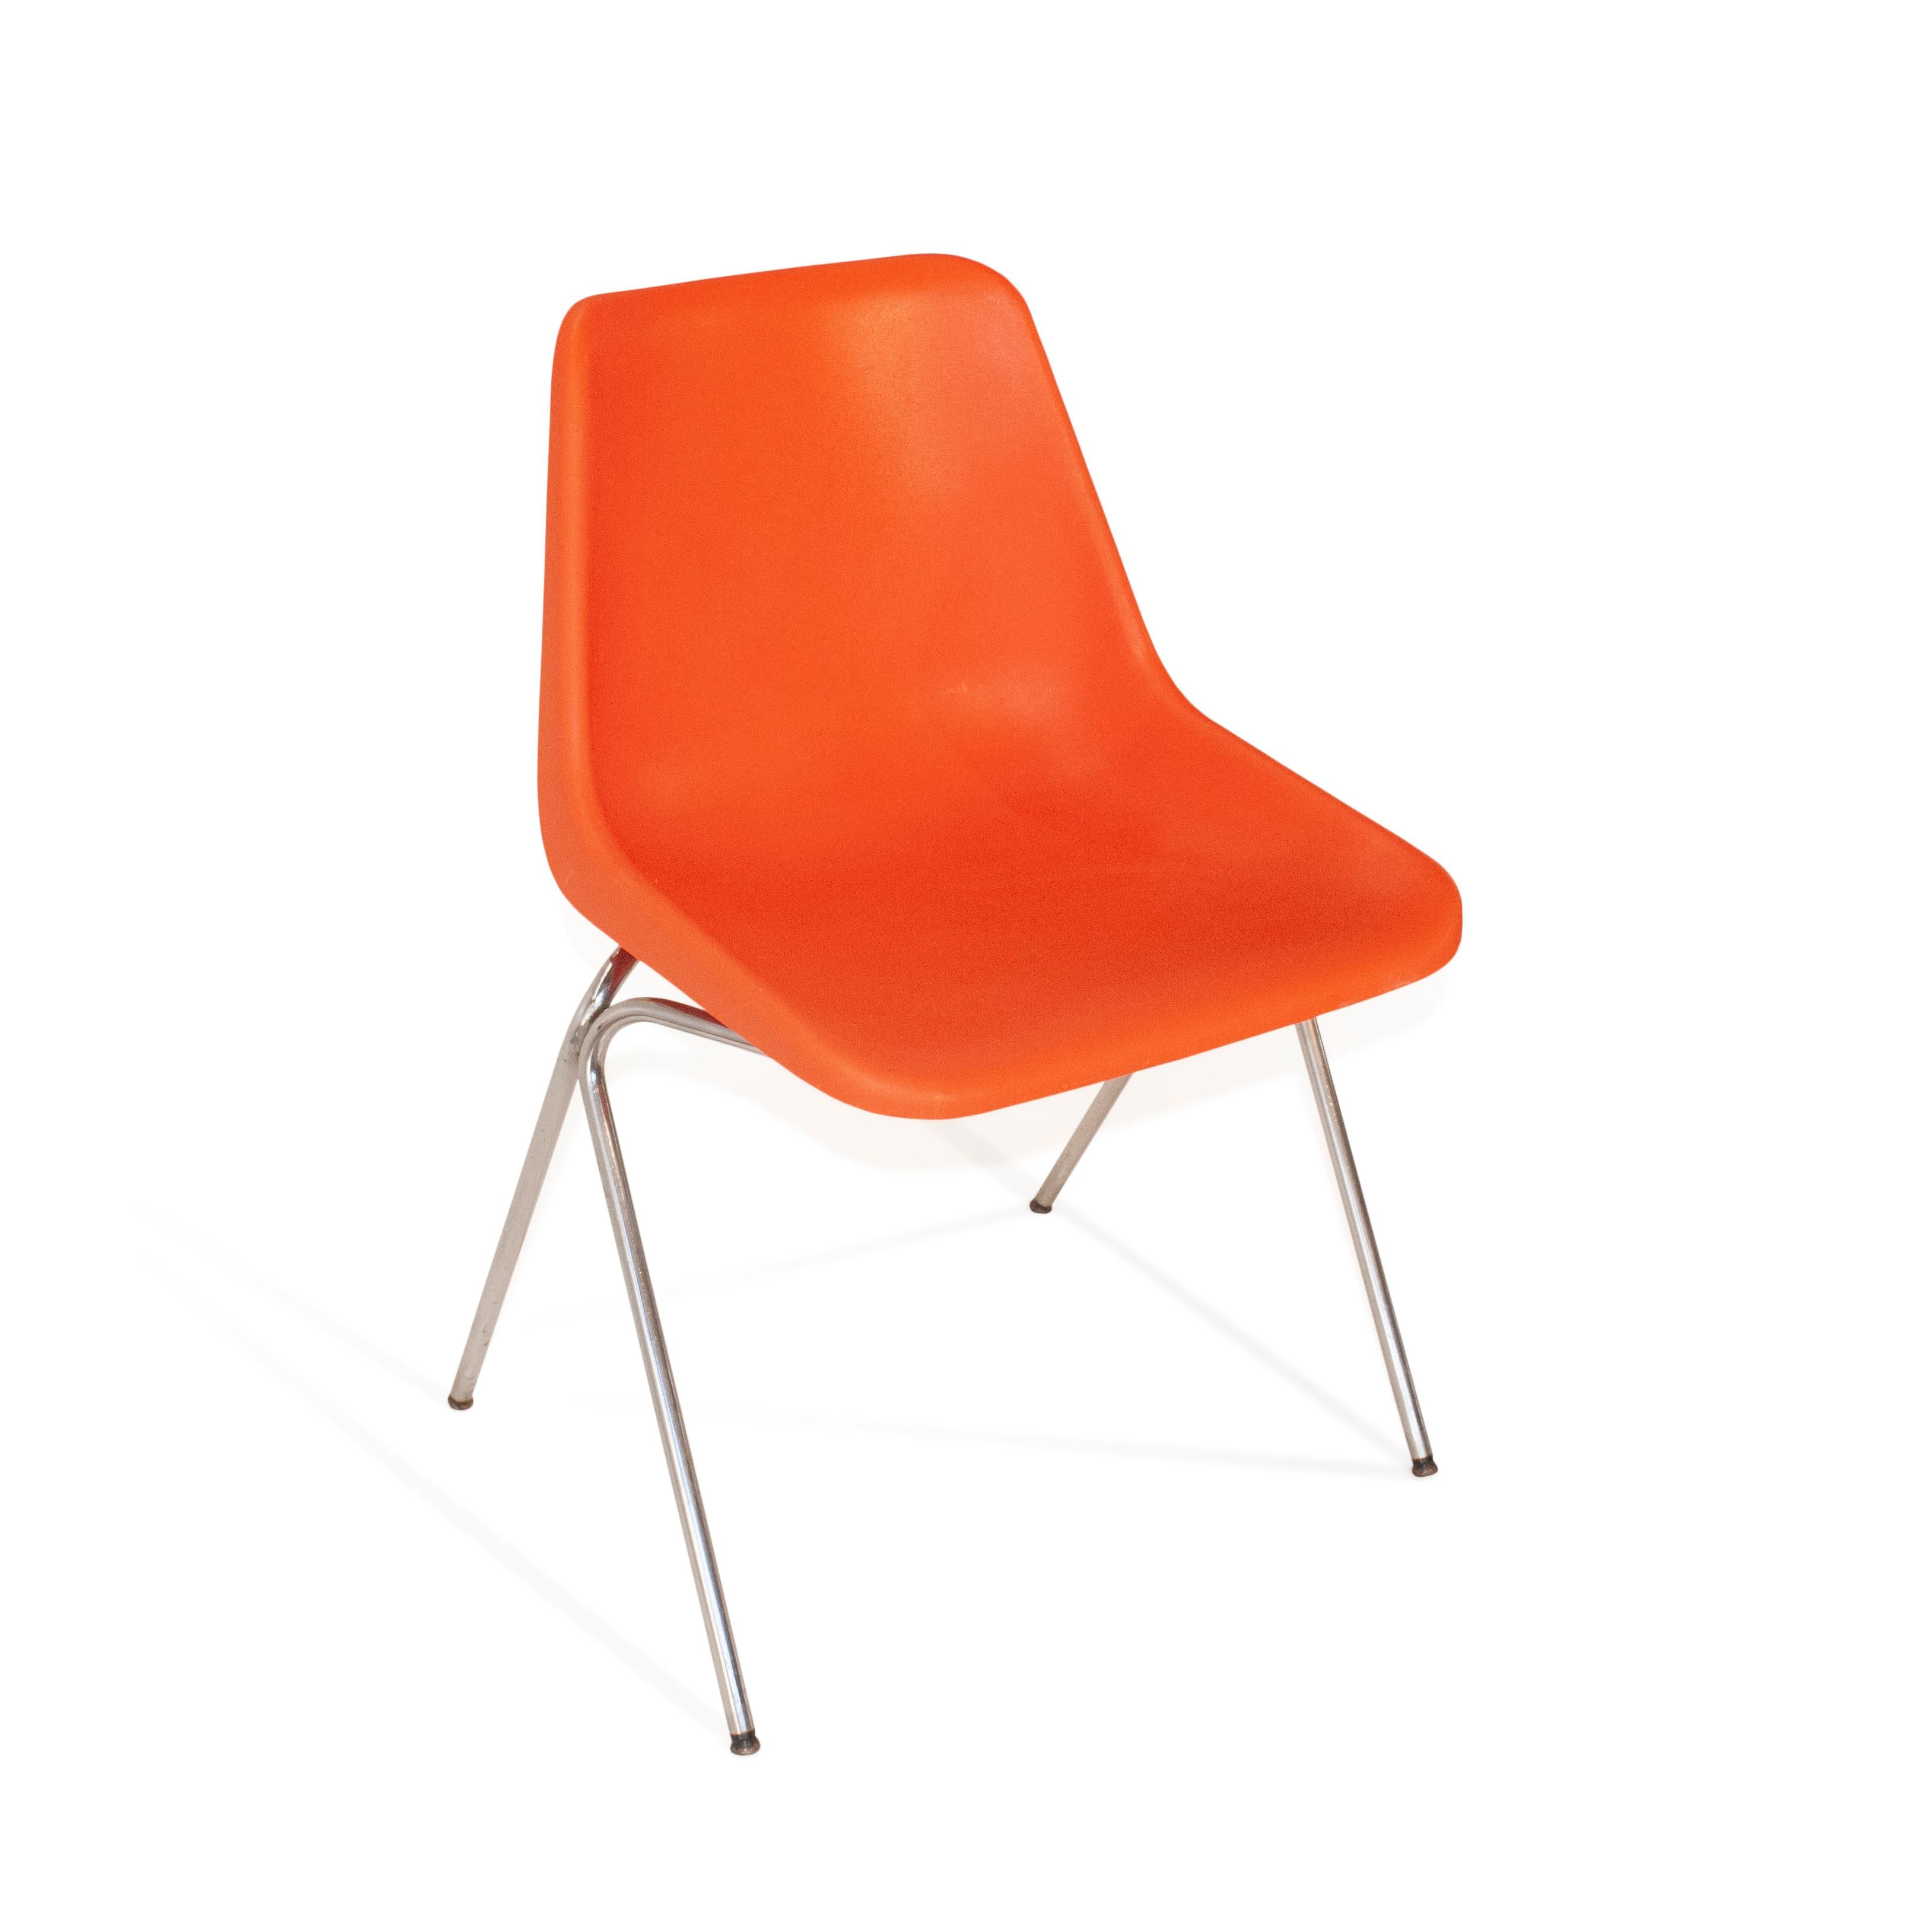 Robin Day was undoubtedly one of the most influential British furniture designers of the 20th century. He is of course best remembered for his polypropylene stacking chairs, since the introduction of the poly side chair in 1963, but Robin Day´s 